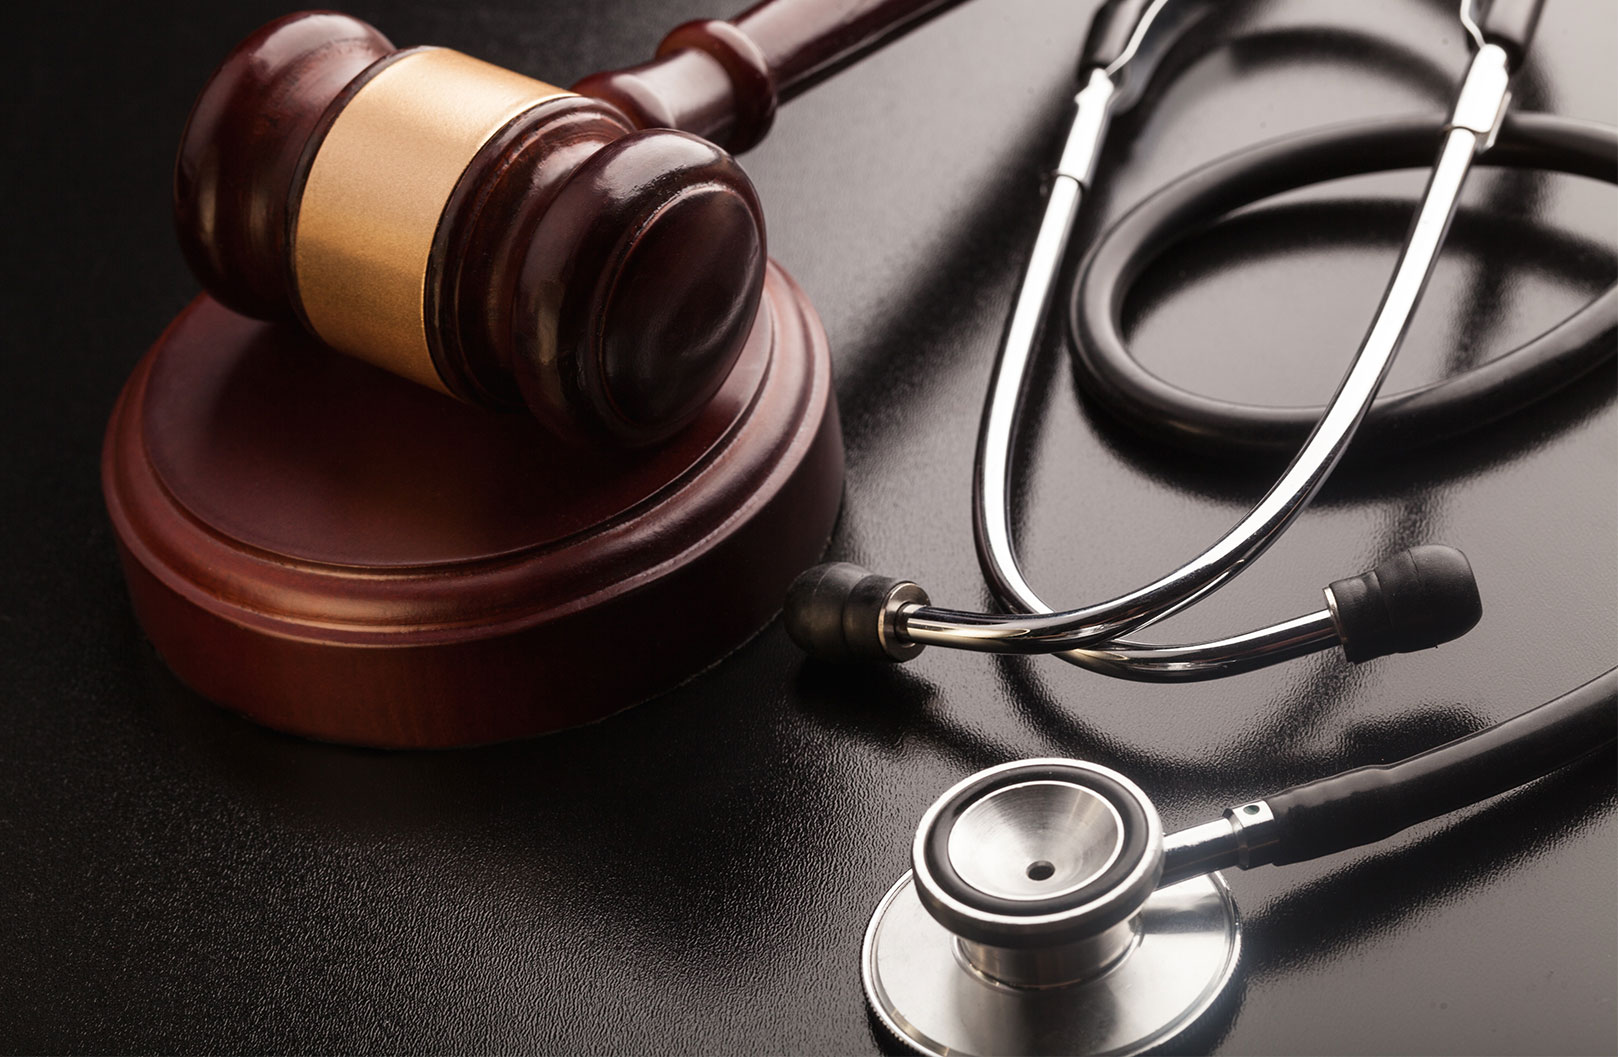 Medical Negligence in the UAE: Two Cases, Two Approaches